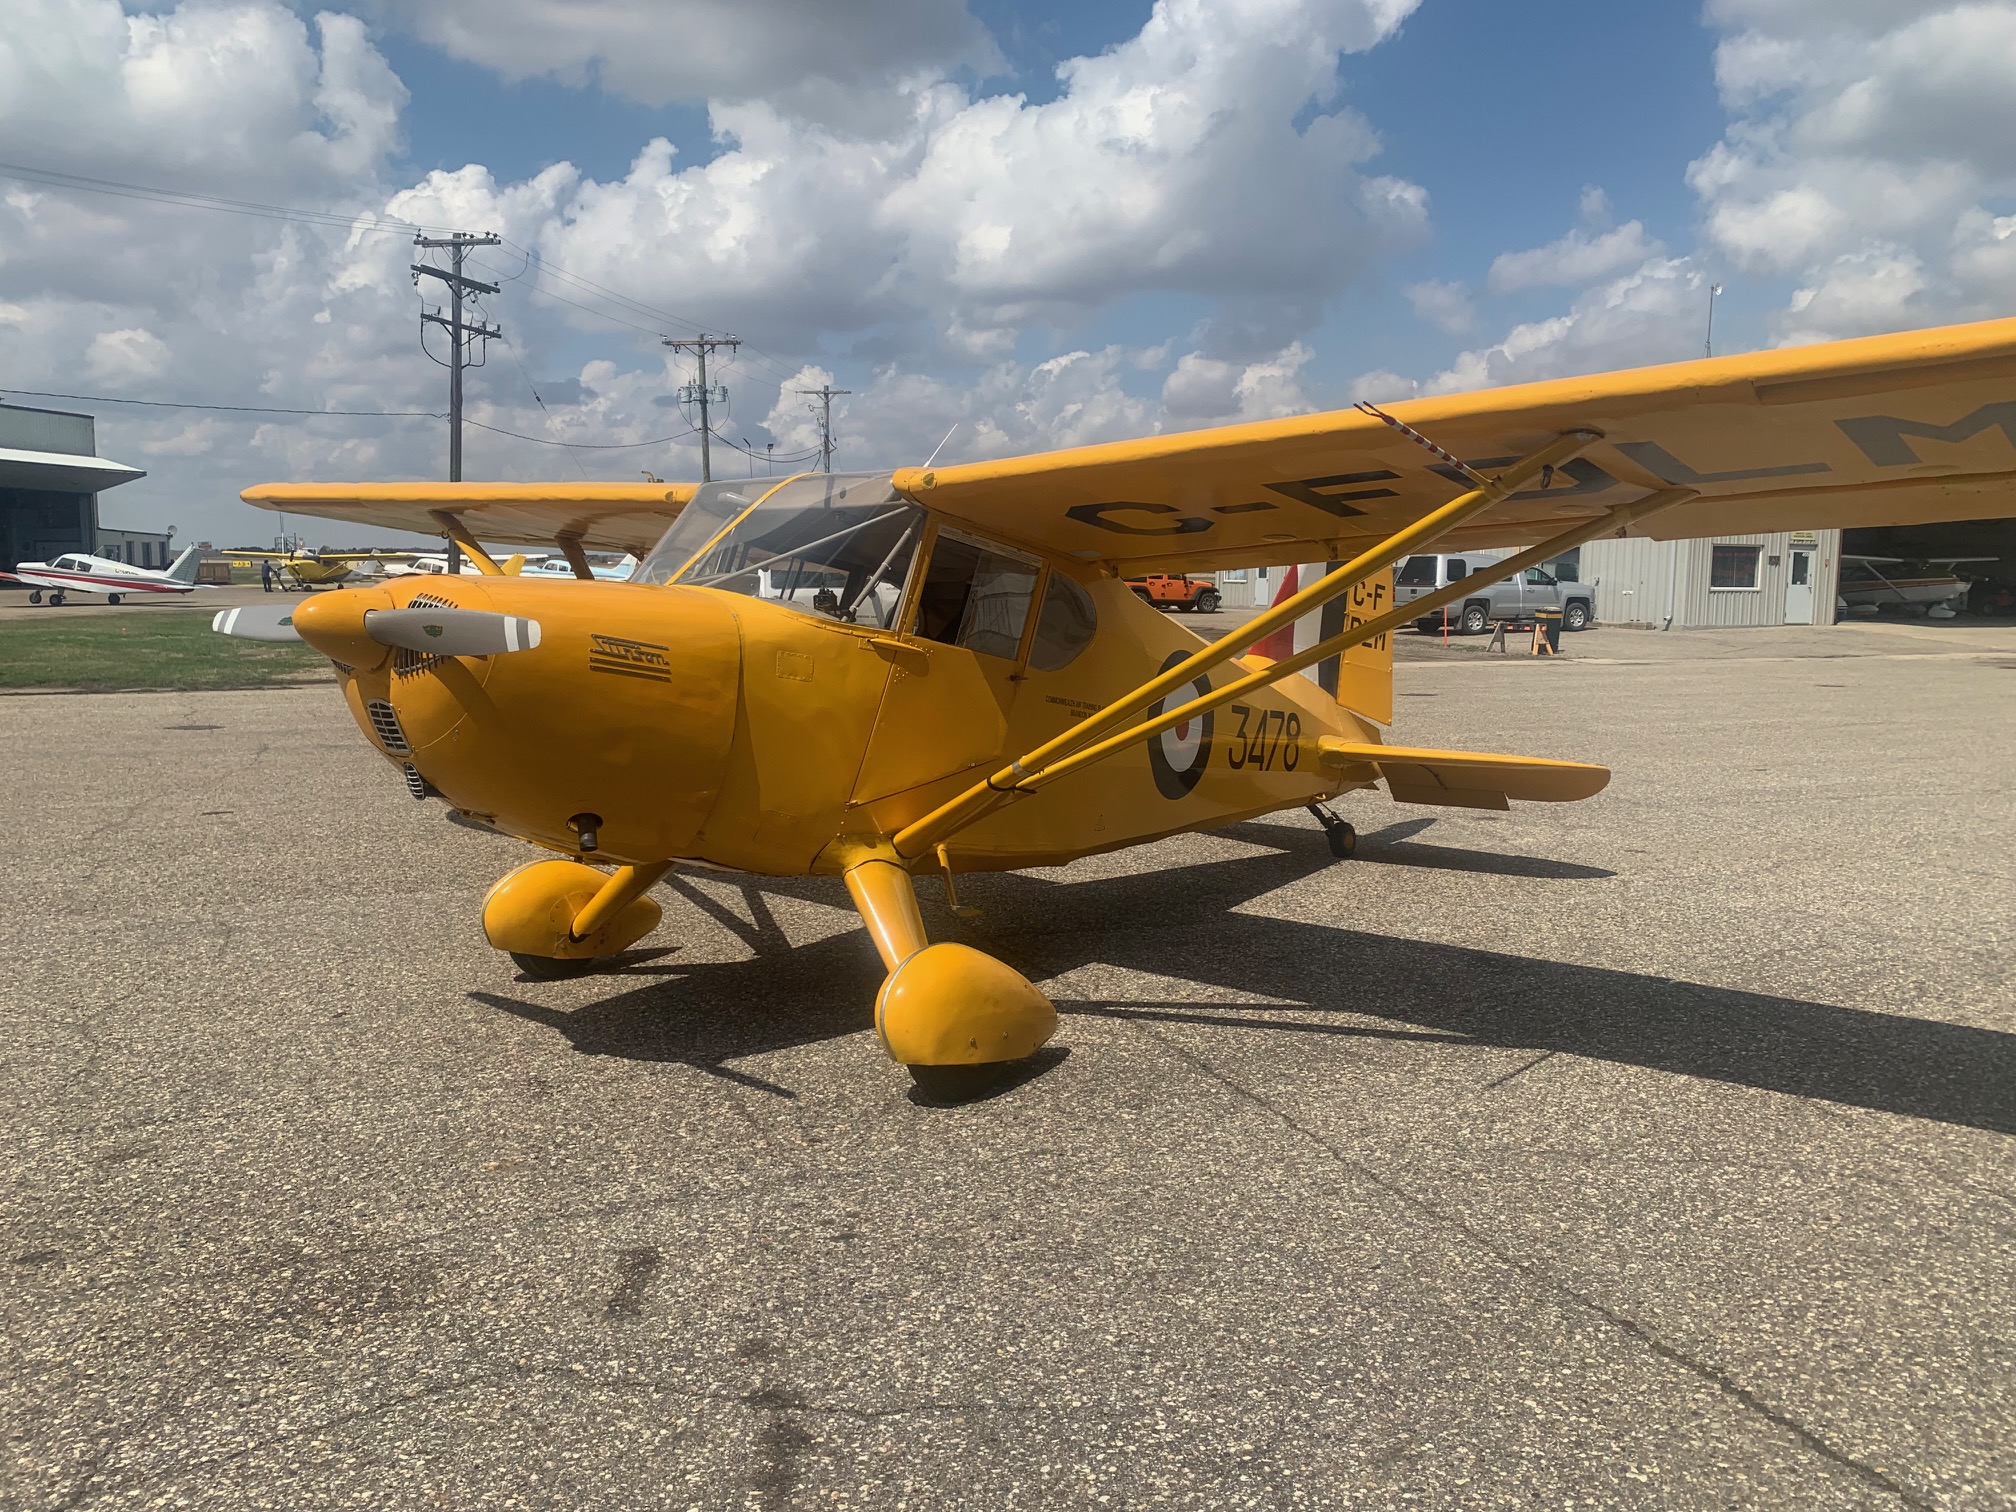 A yellow Stinson Model 105 Voyager sits on the tarmac.